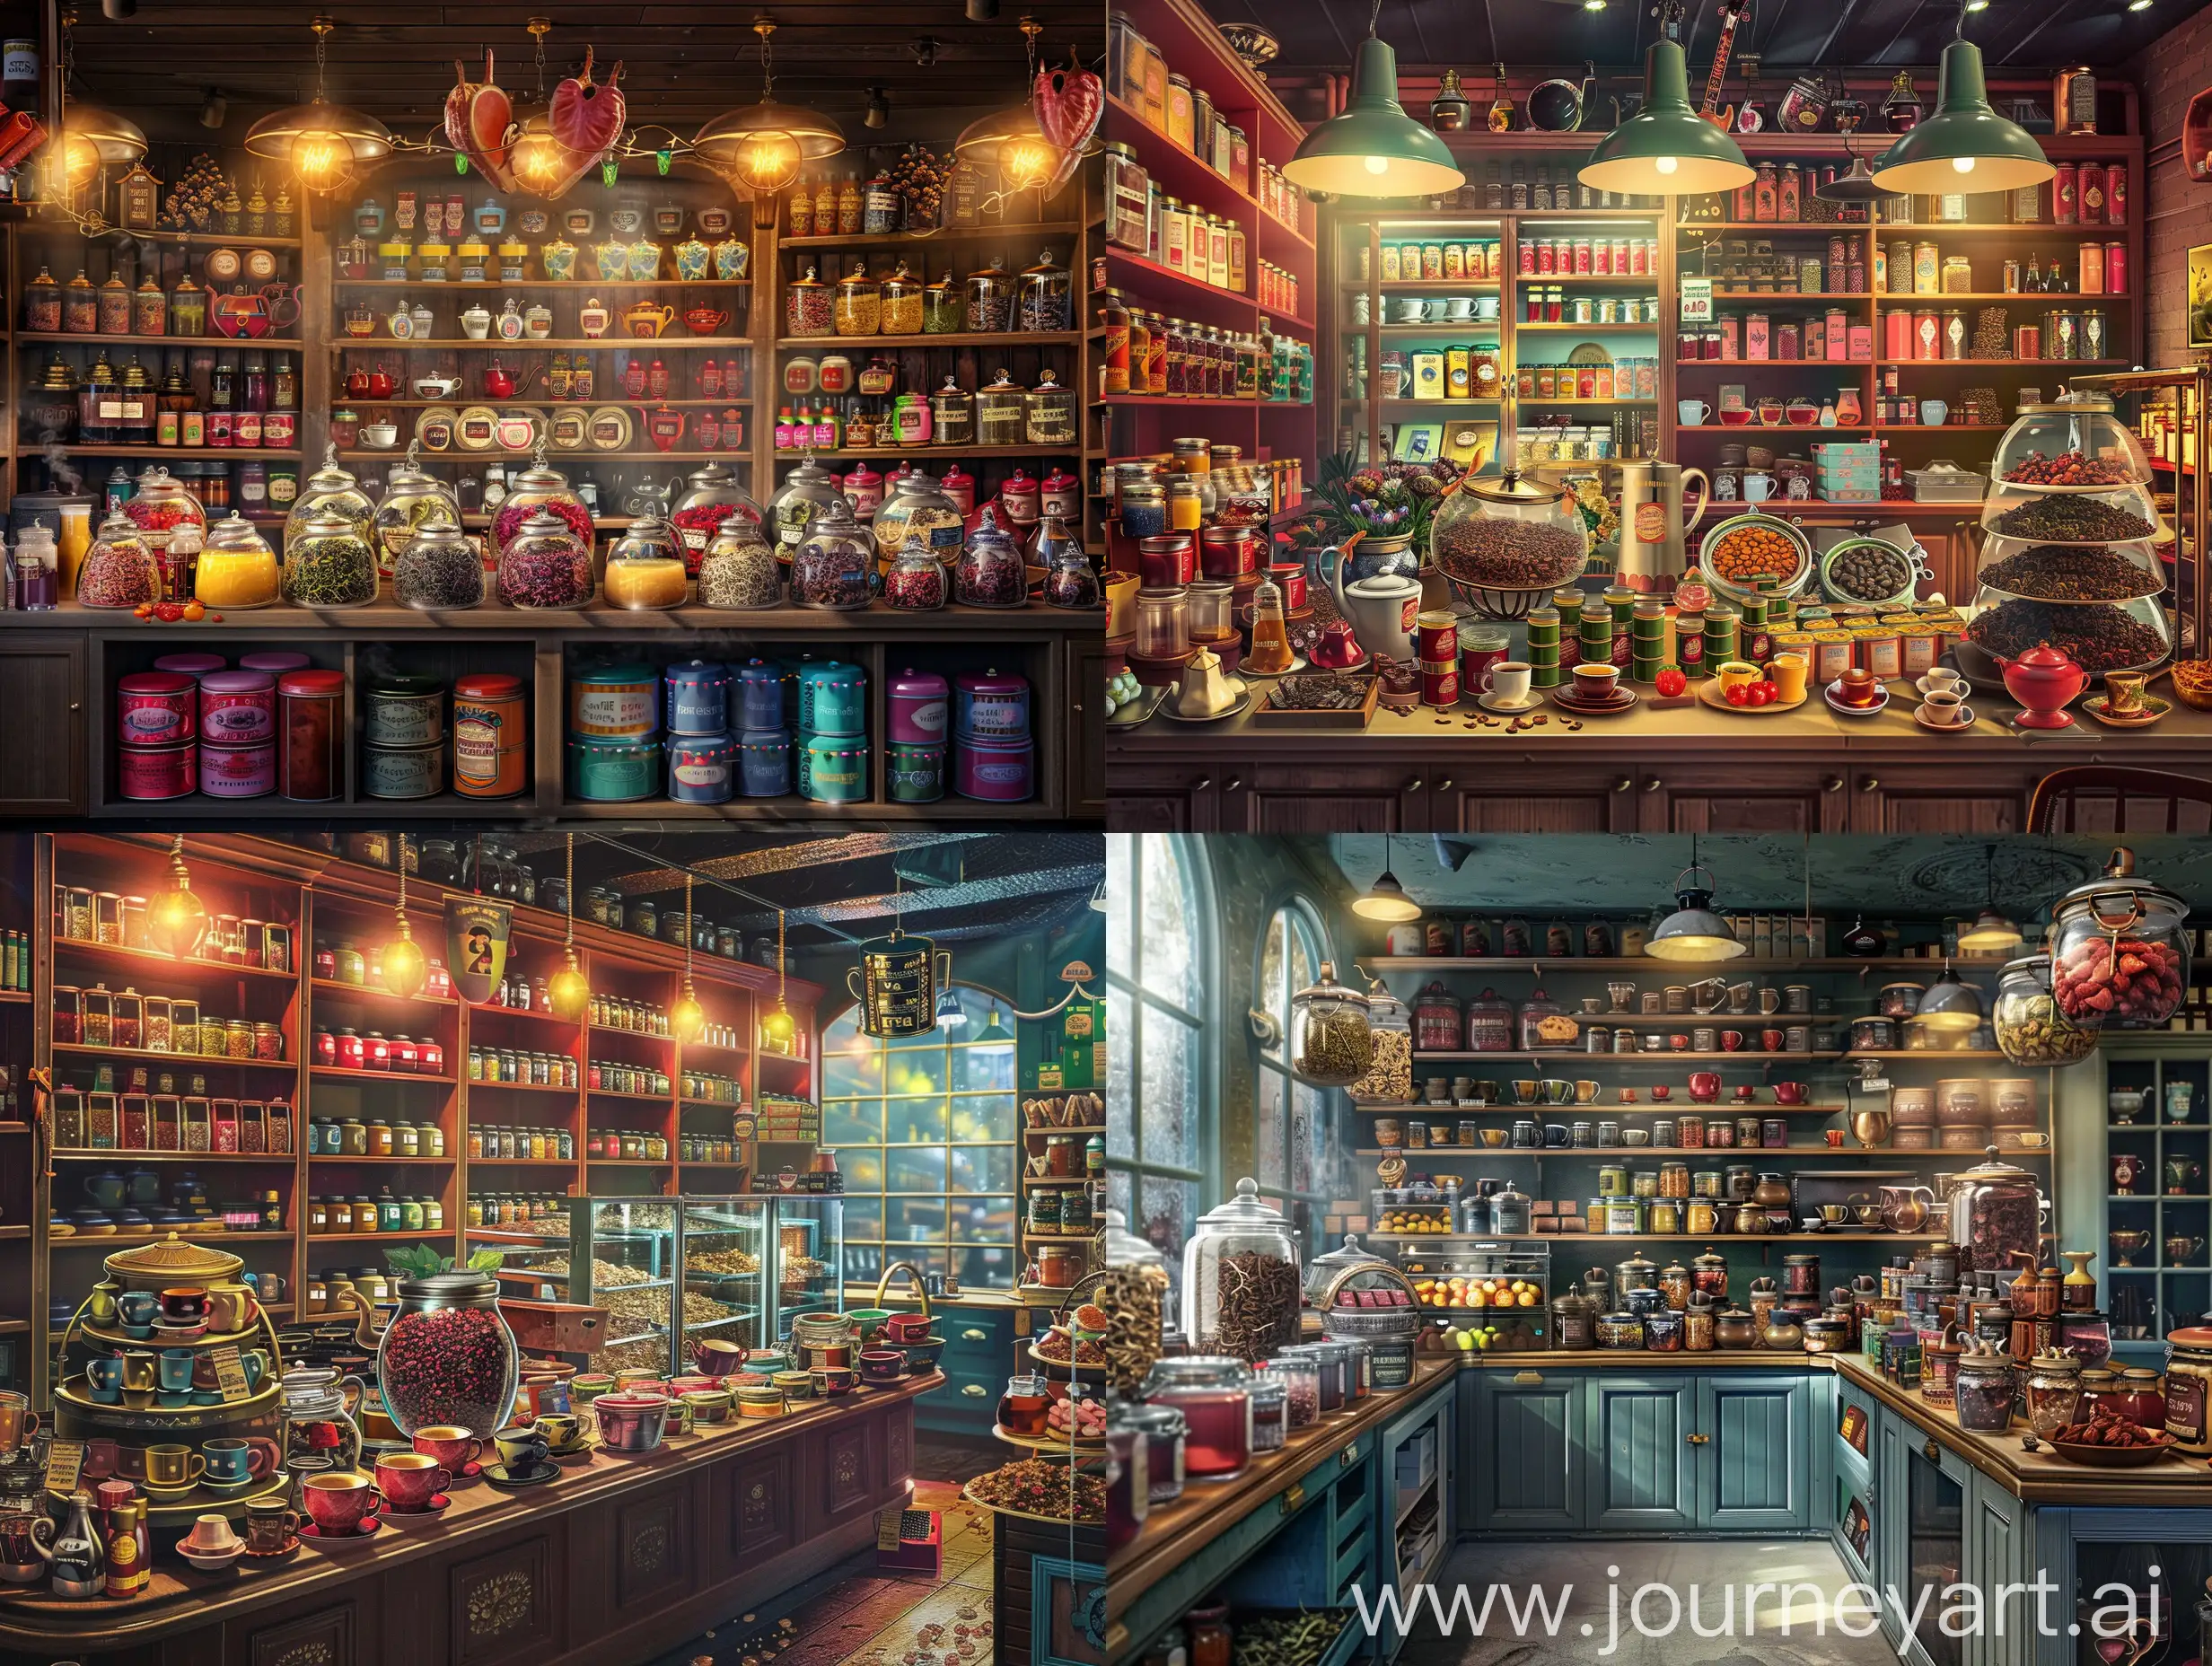 A realistic depiction of a tea shop with a magical atmosphere traveling through time, depicting teas in vast quantities, flavors and scents, (medium: photorealistic digital painting) (style: inspired by album cover art and concert posters from different eras)(lighting: stage lighting creating a warm  , intimate, discreet atmosphere)(colors: rich and vivid, reflecting a magical mood)(composition: photos taken with a 24 mm wide-angle lens, capturing shelves, counters, tea cans and numerous accessories, coffees, chocolates, jars of juices, candied fruits)